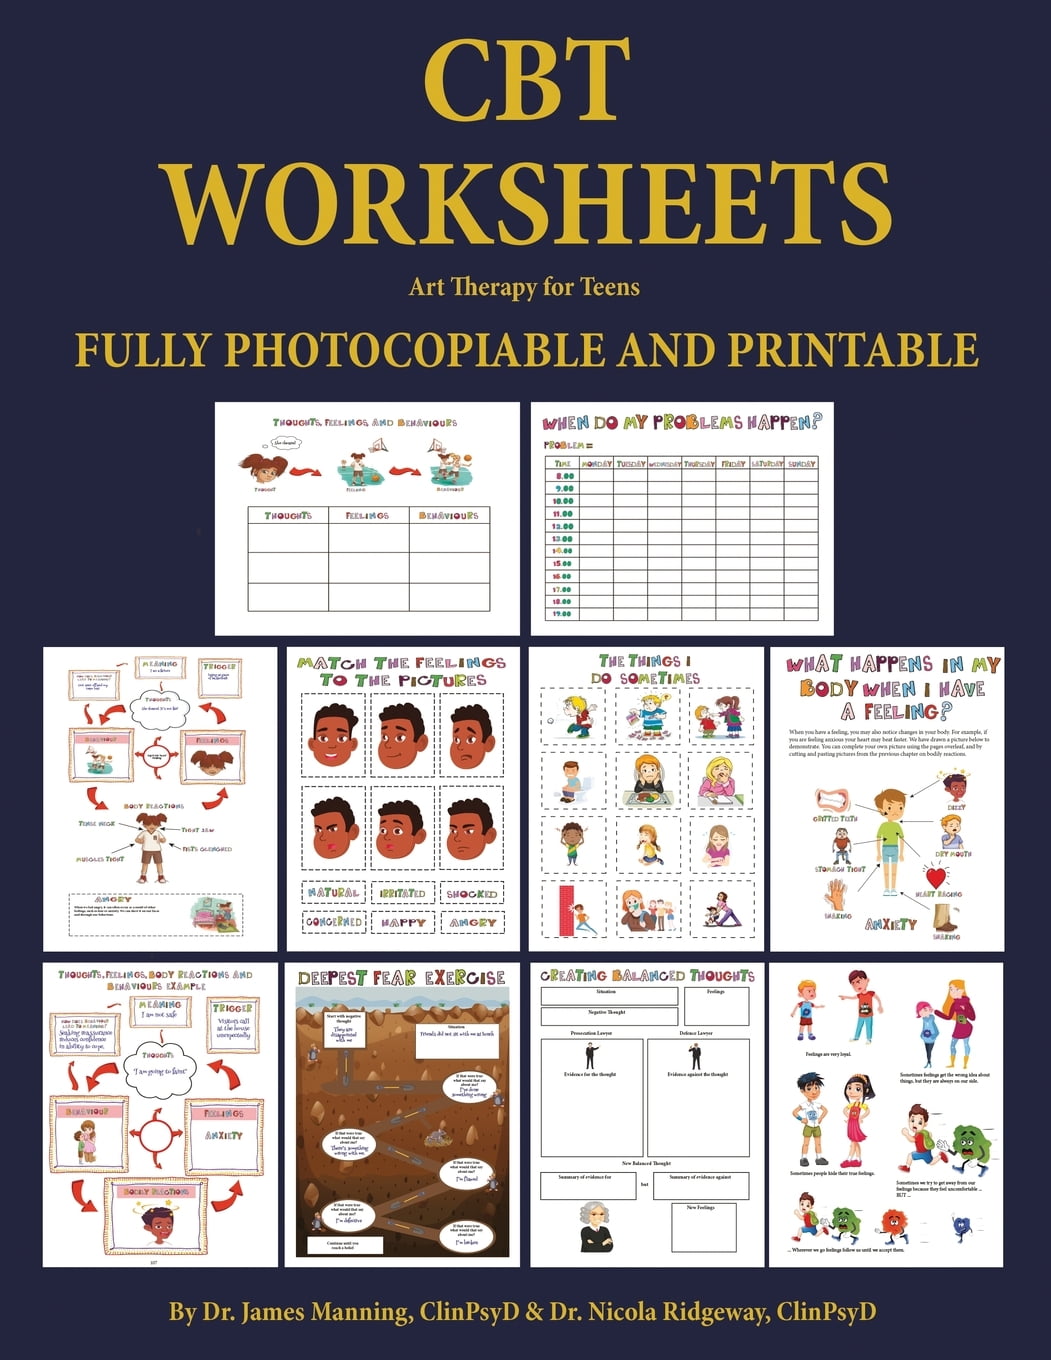 cbt-worksheets-art-therapy-for-teens-cbt-worksheets-cbt-worksheets